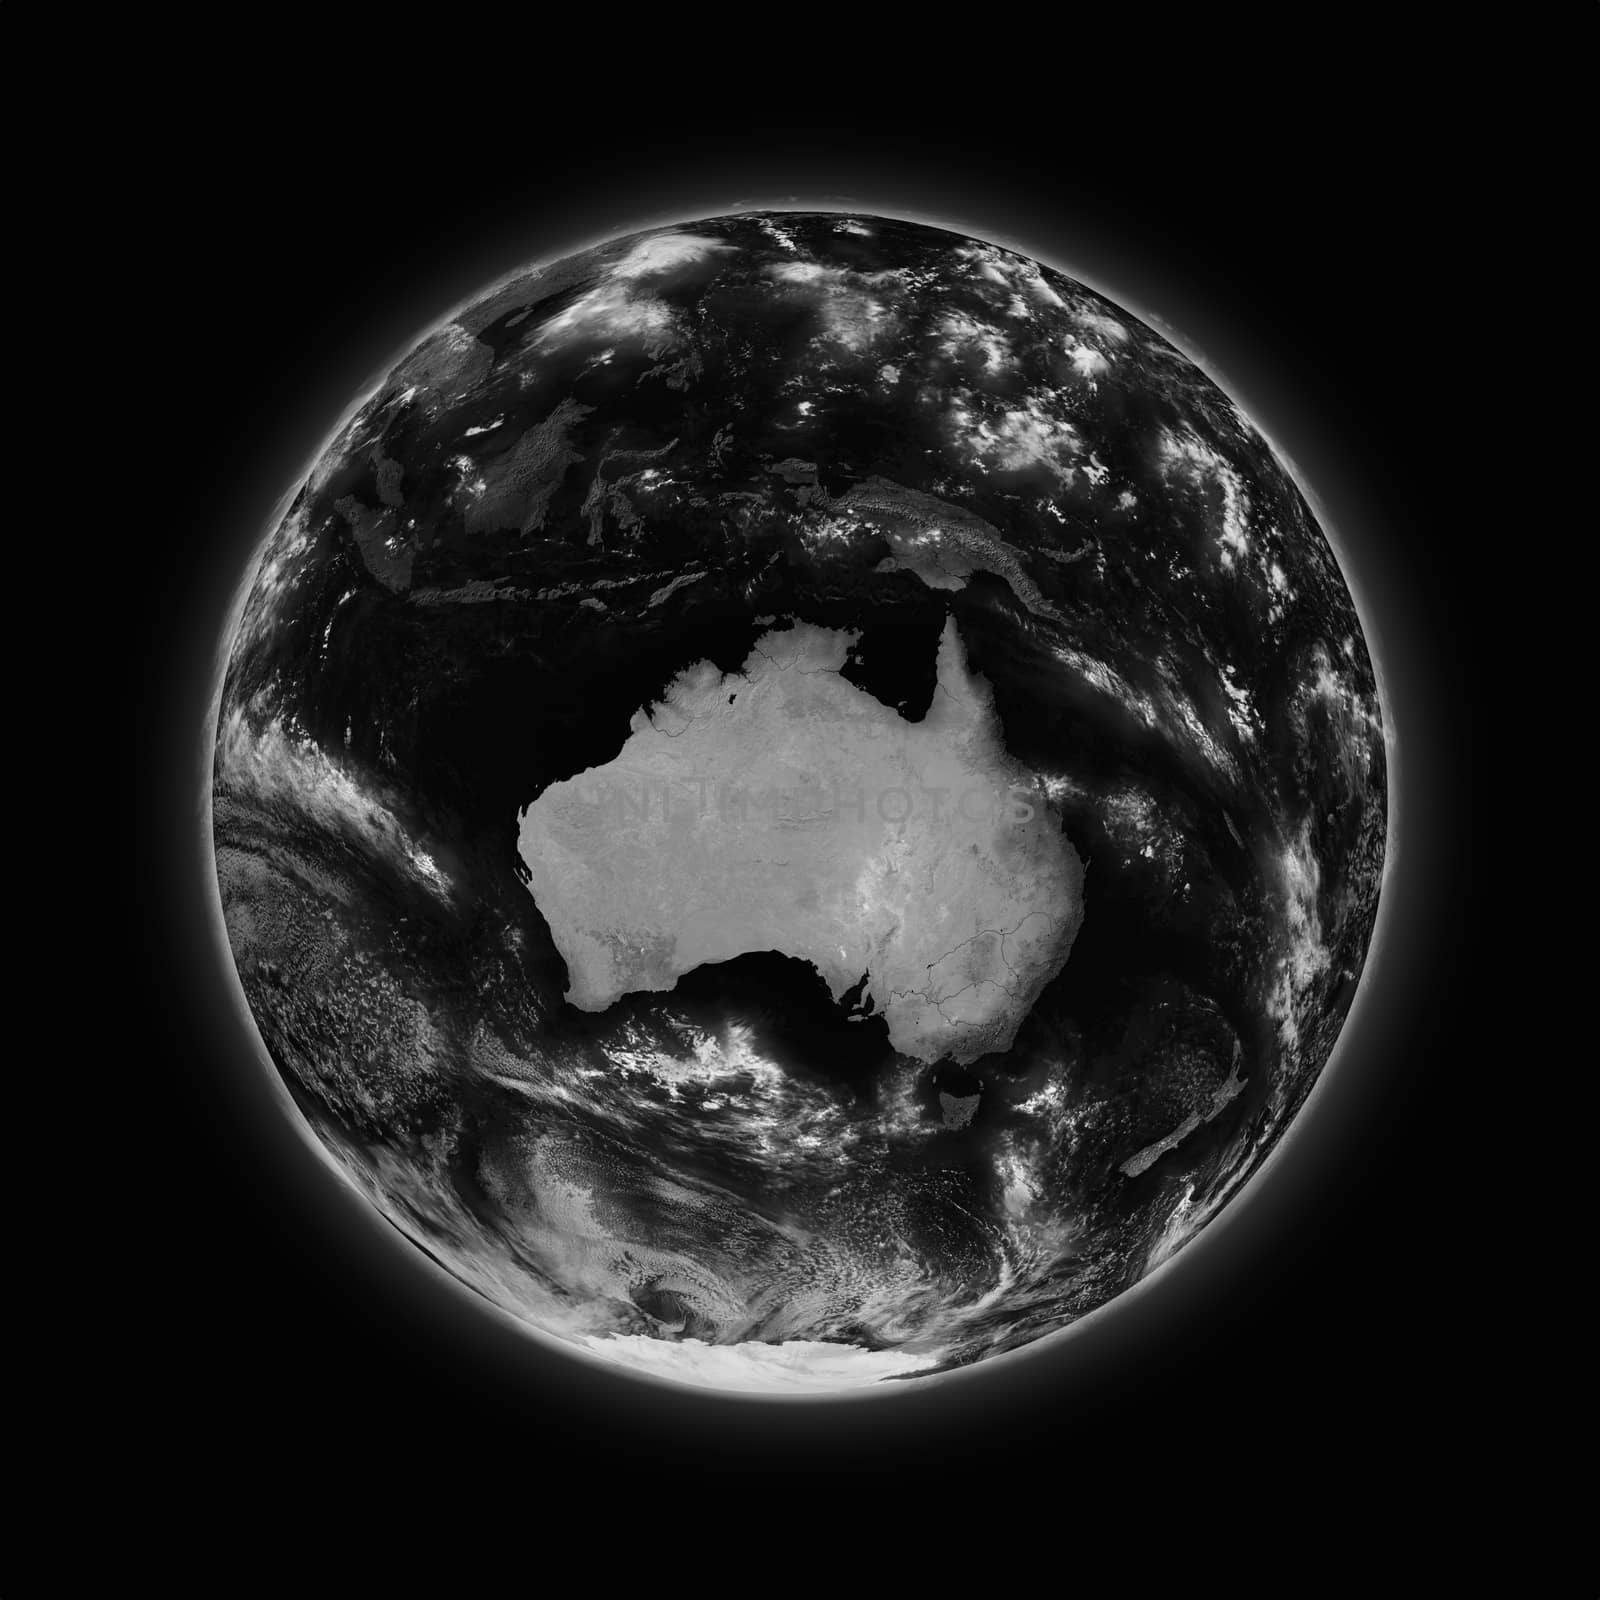 Australia on dark planet Earth isolated on black background. Highly detailed planet surface. Elements of this image furnished by NASA.